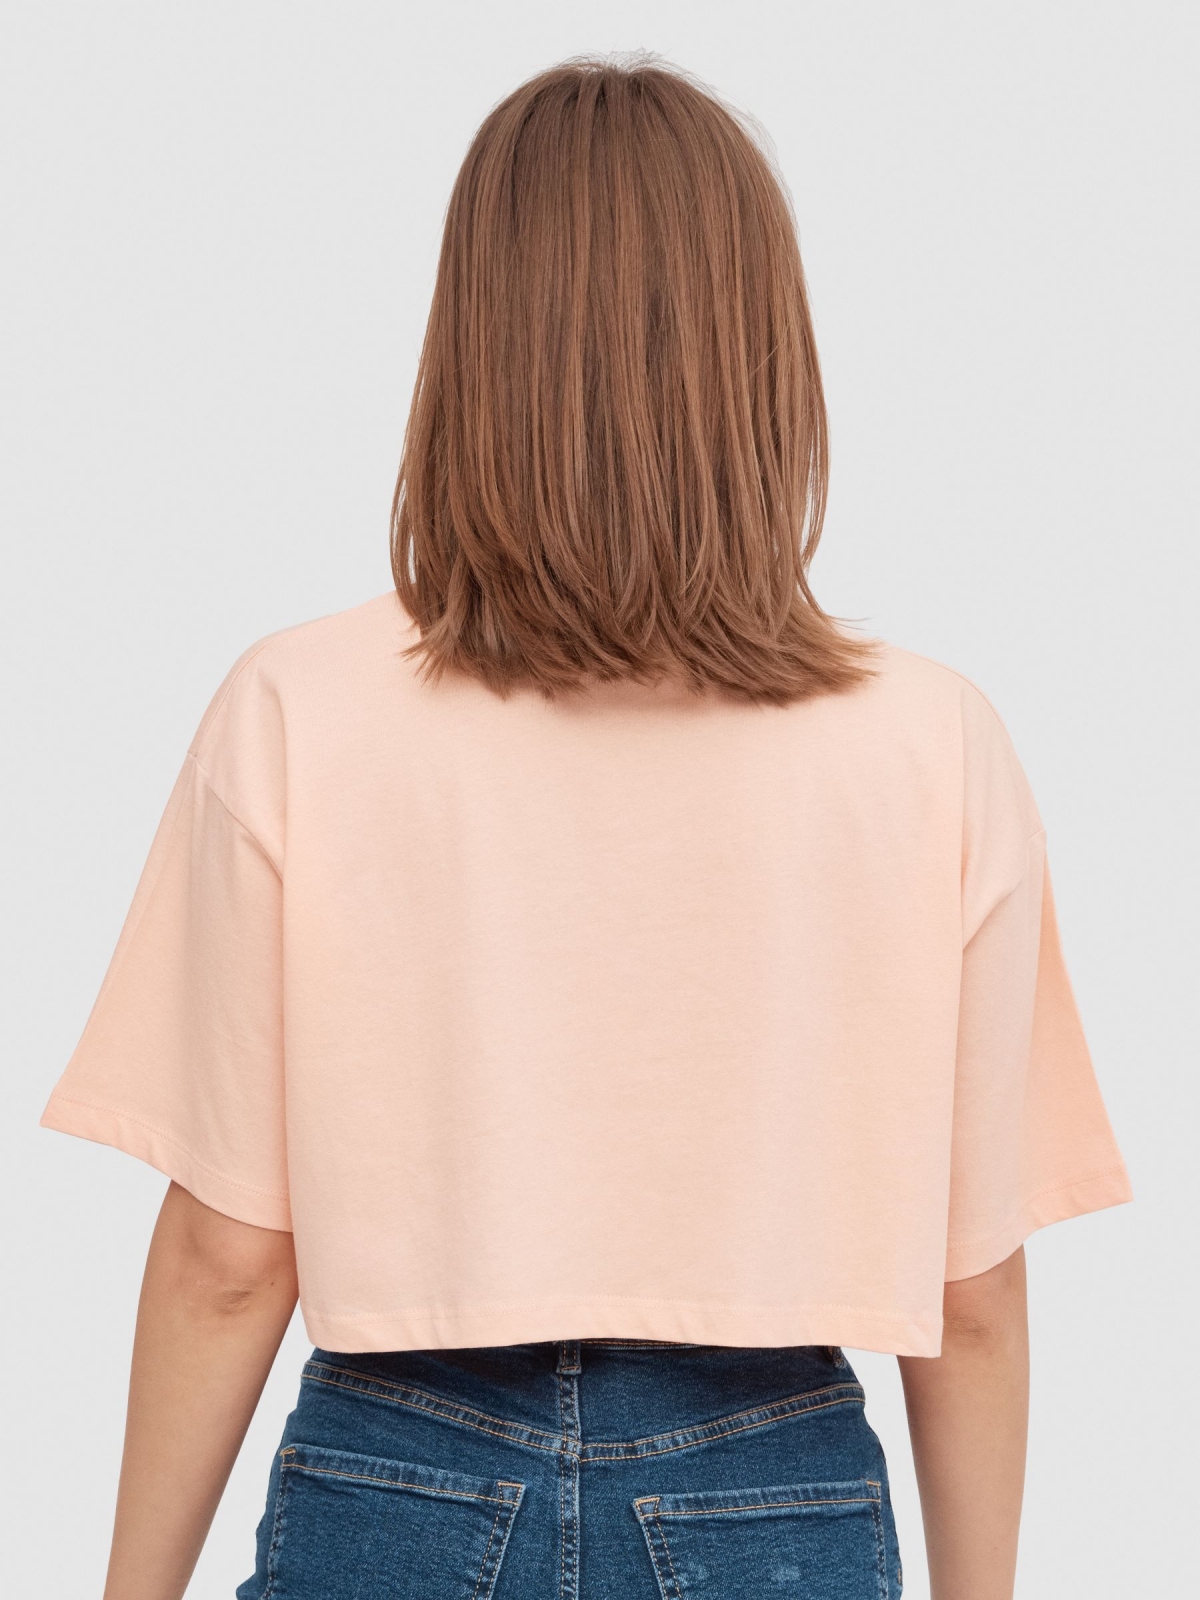 Crocodile crop top pink middle back view